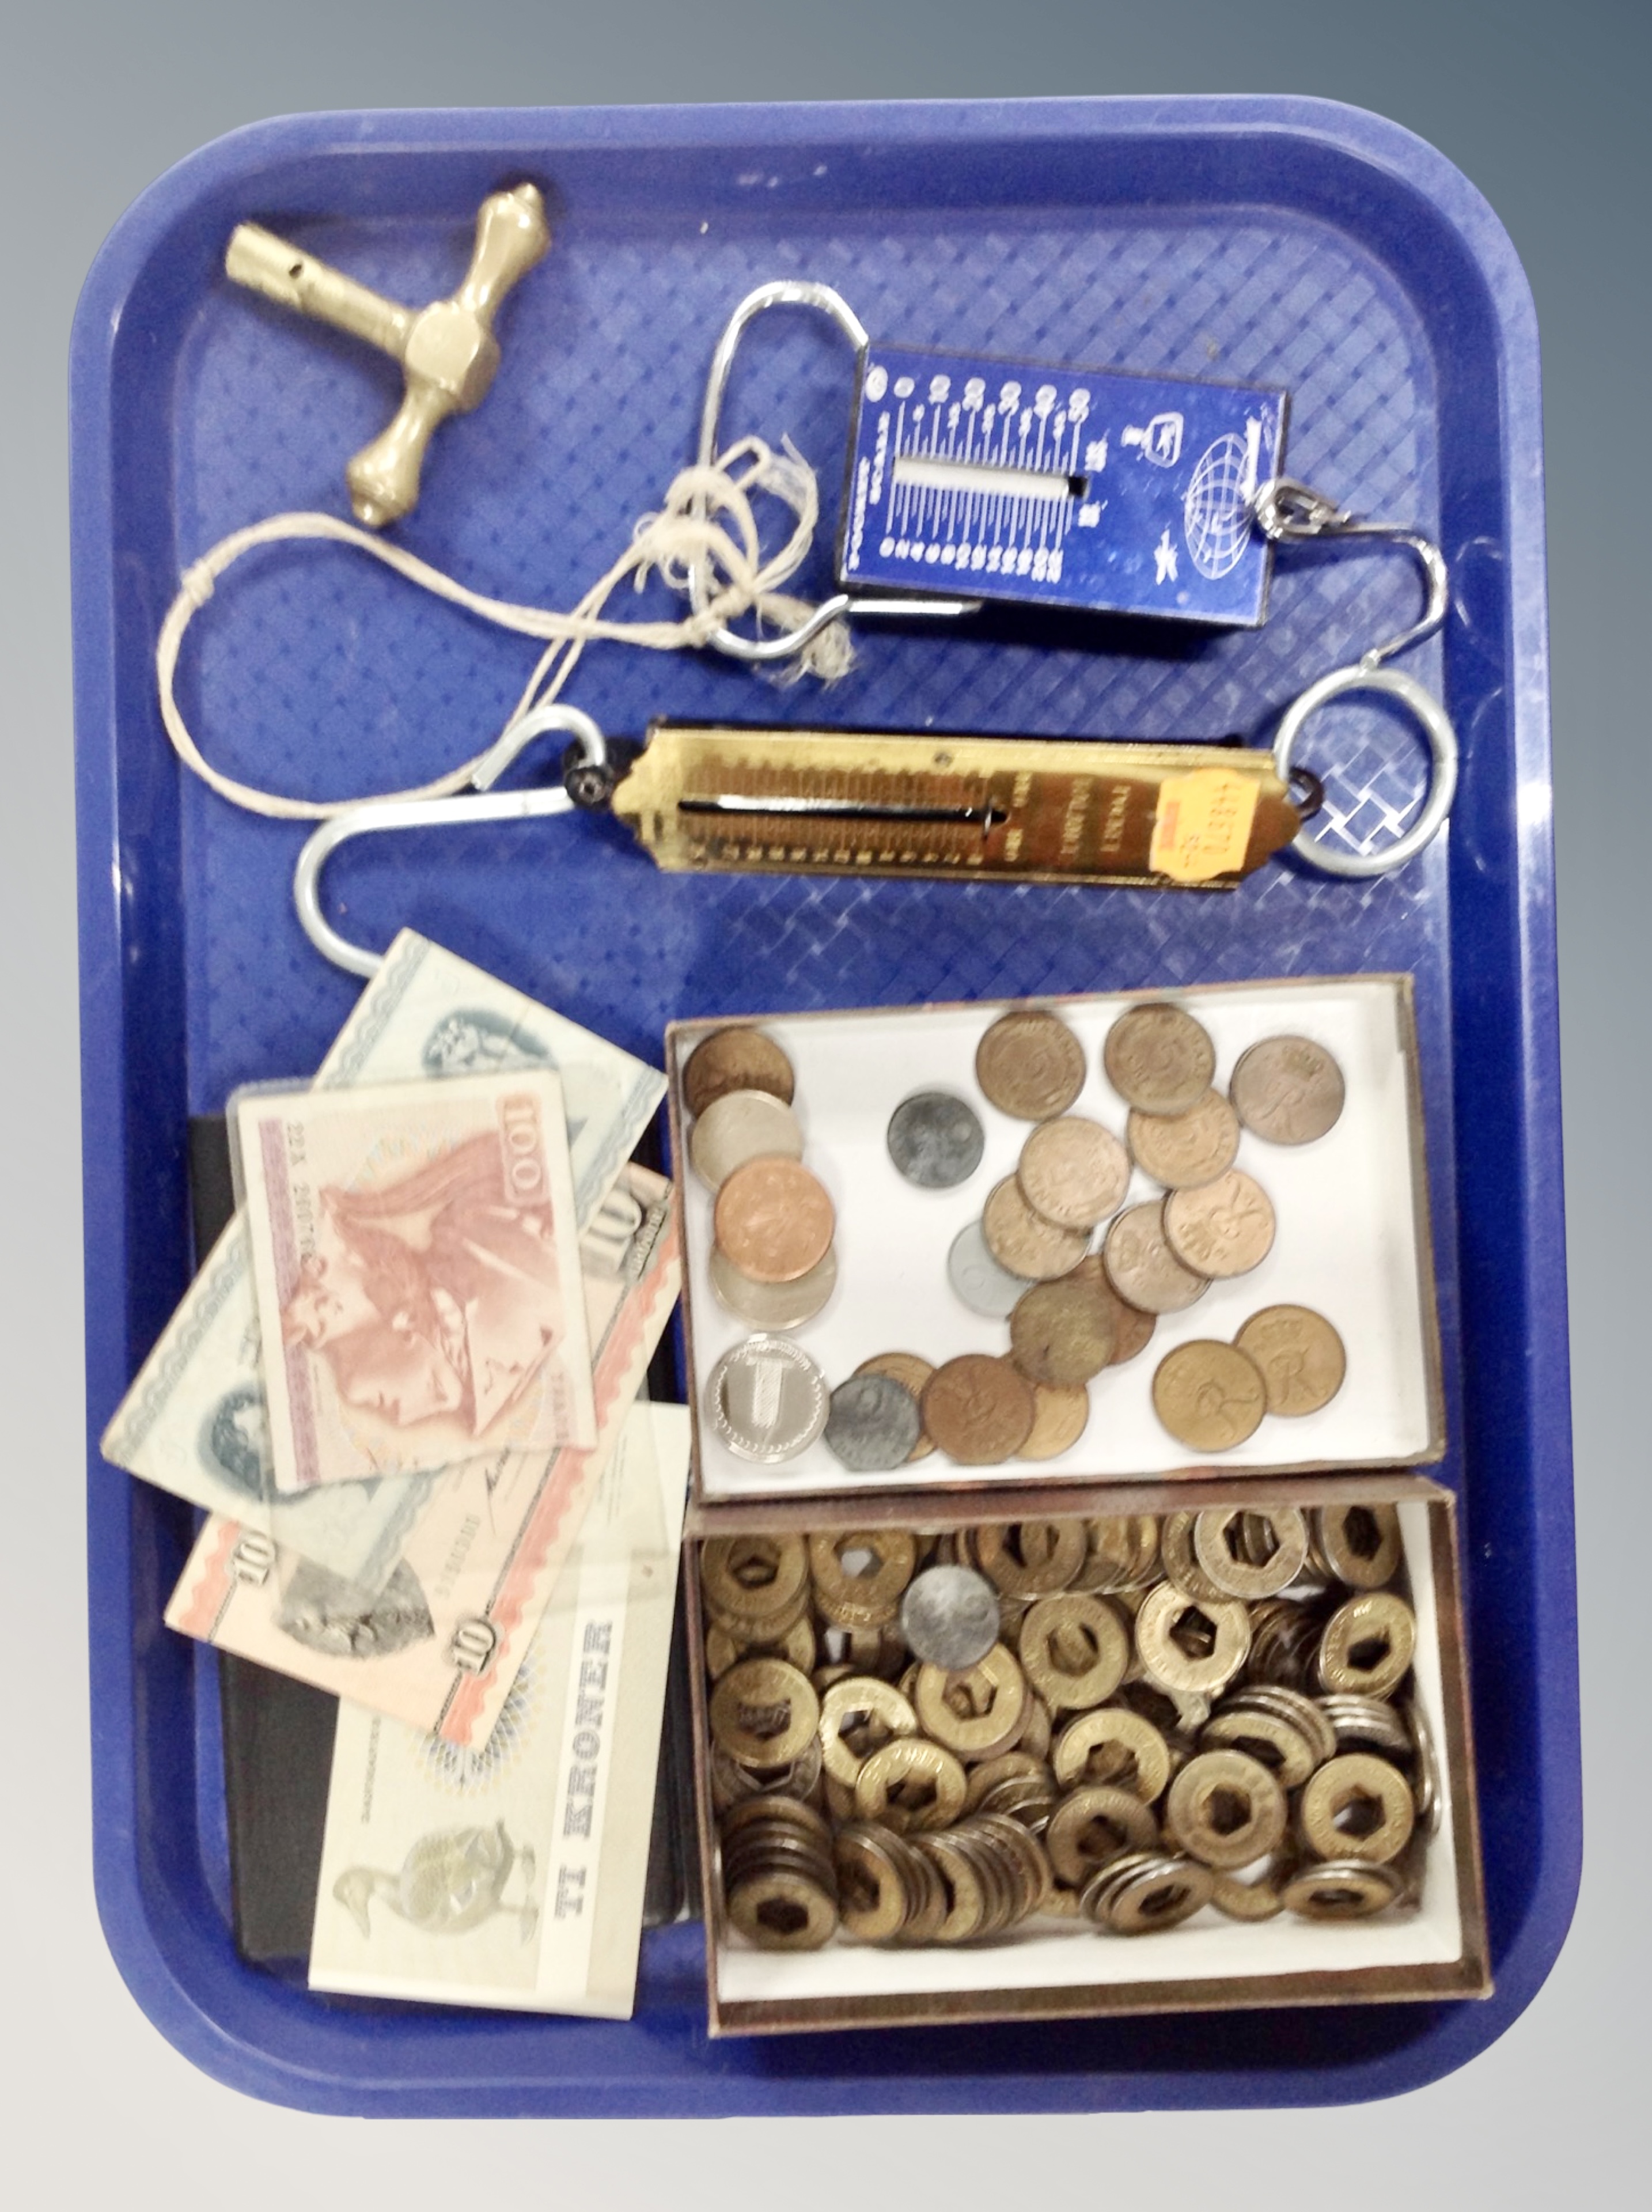 A tray containing pocket balance scales, foreign bank notes and coins.